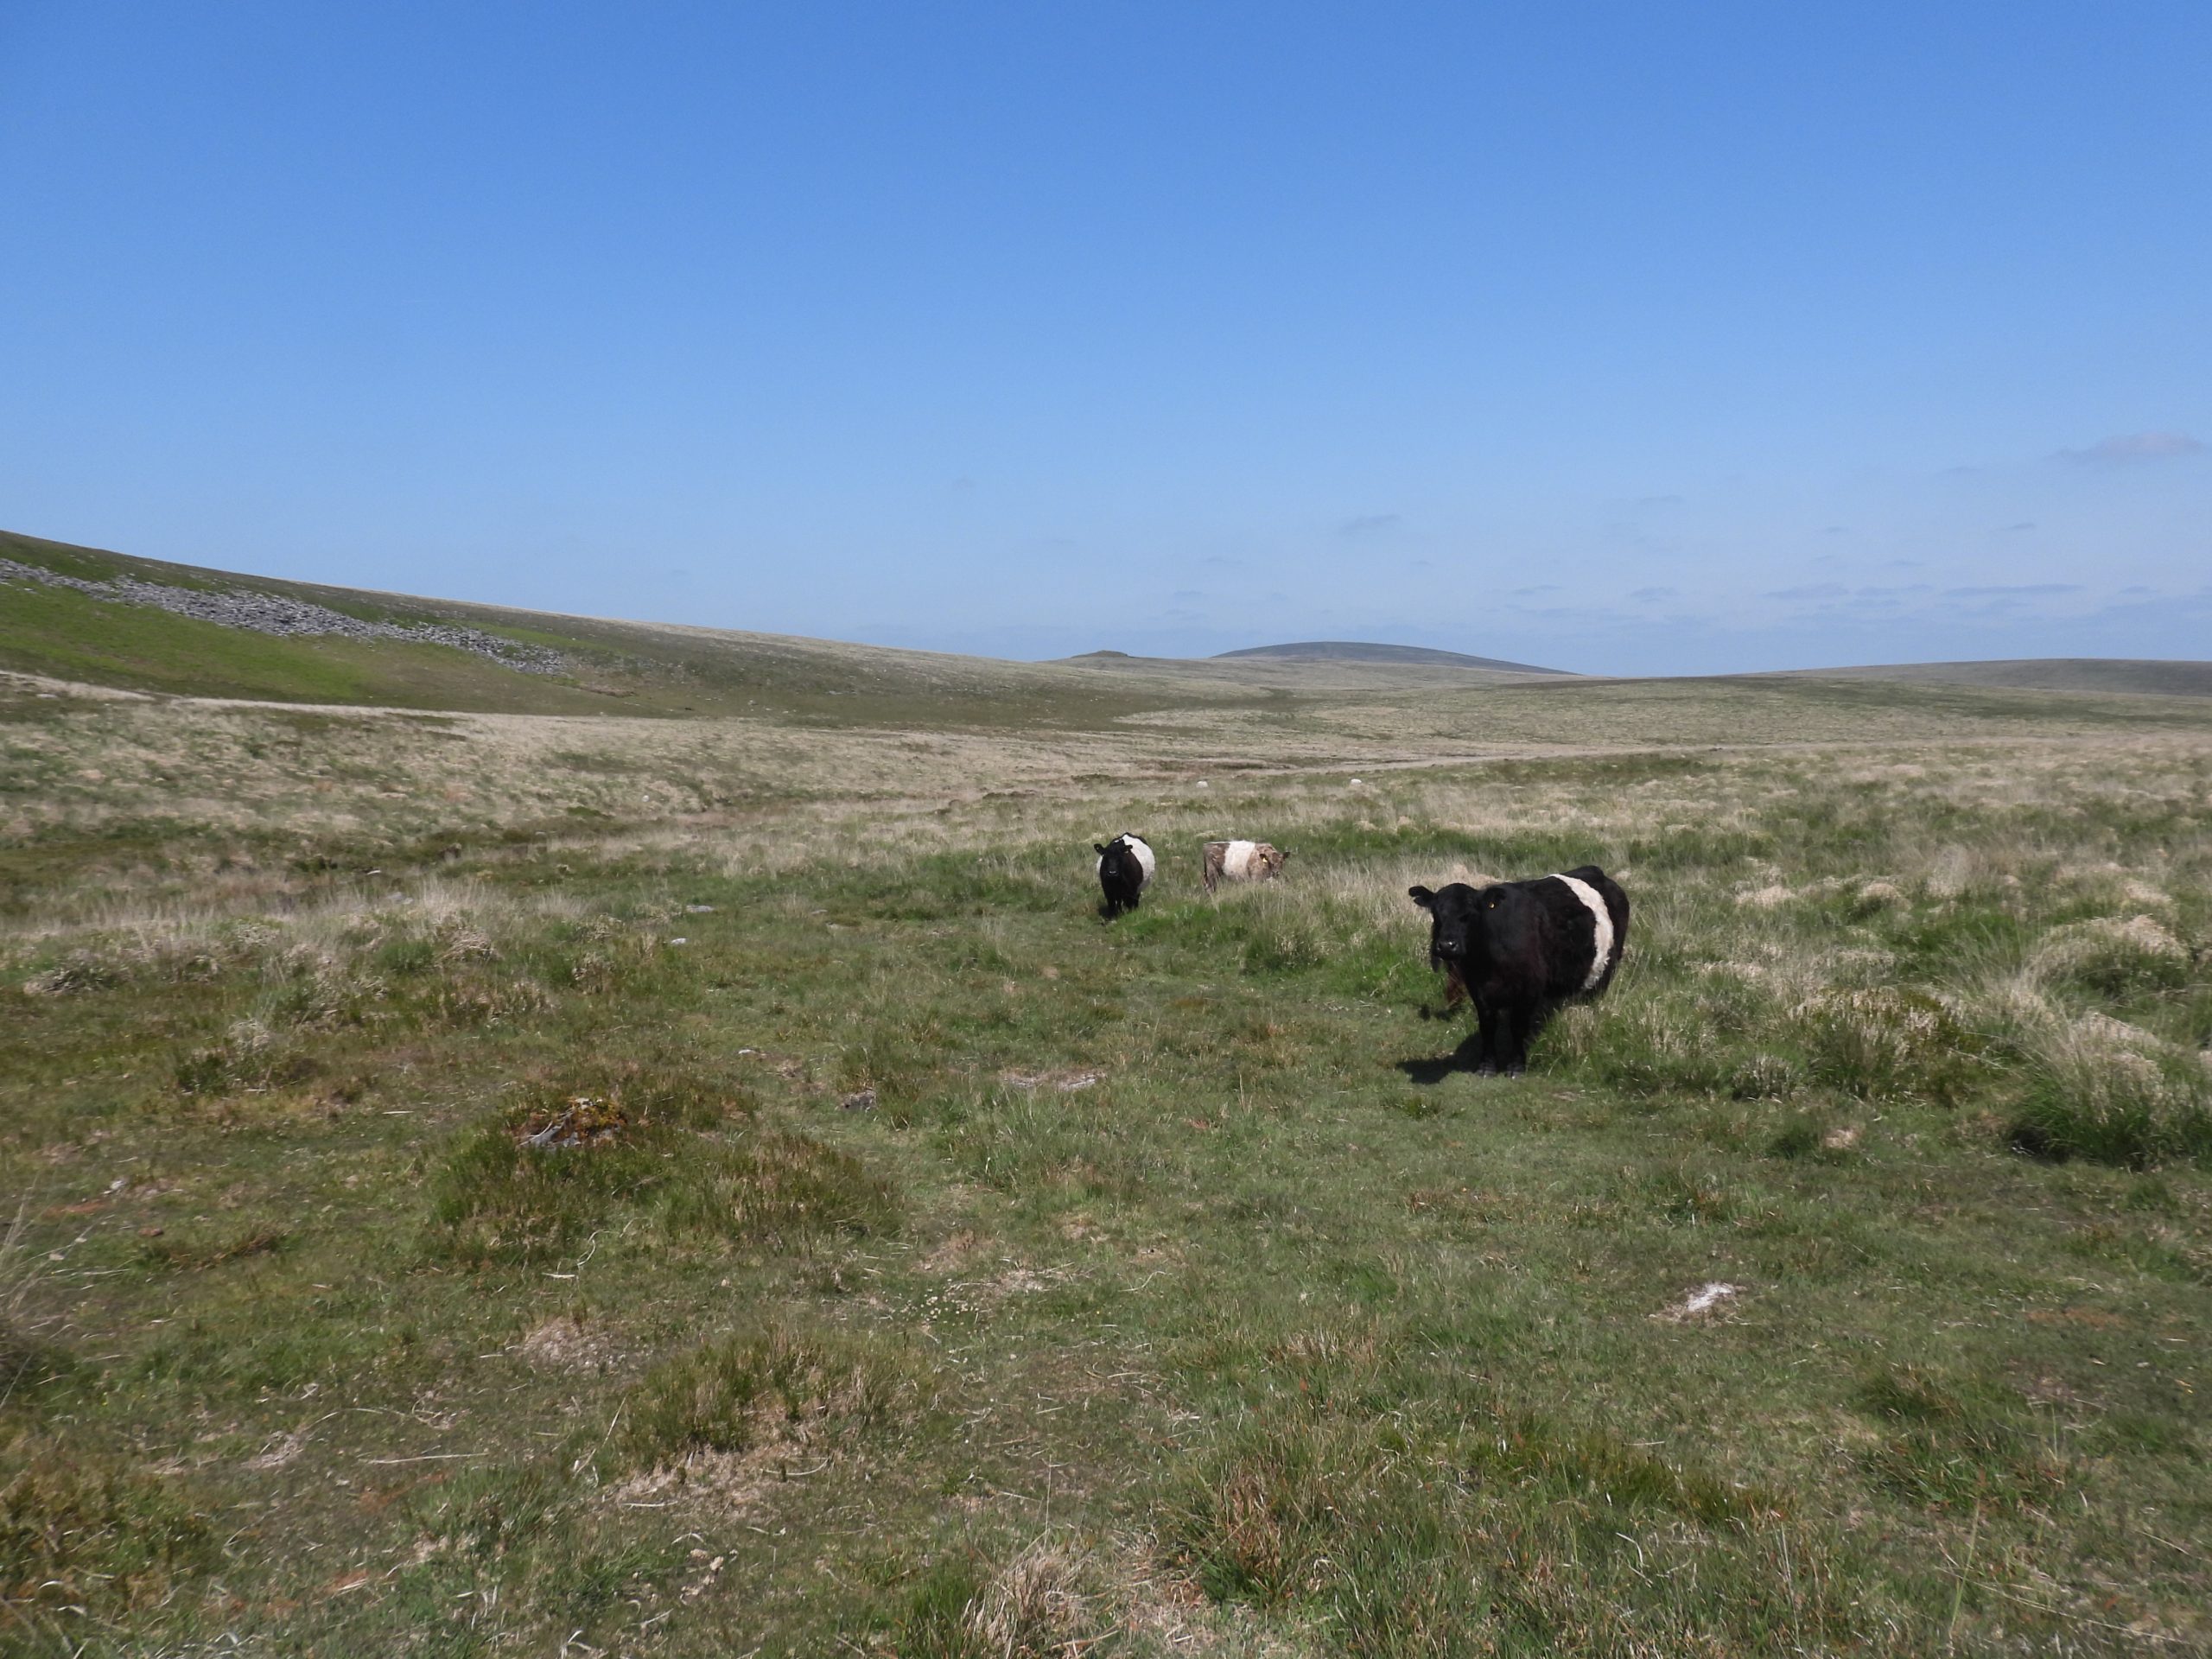 12. Belted Galloway